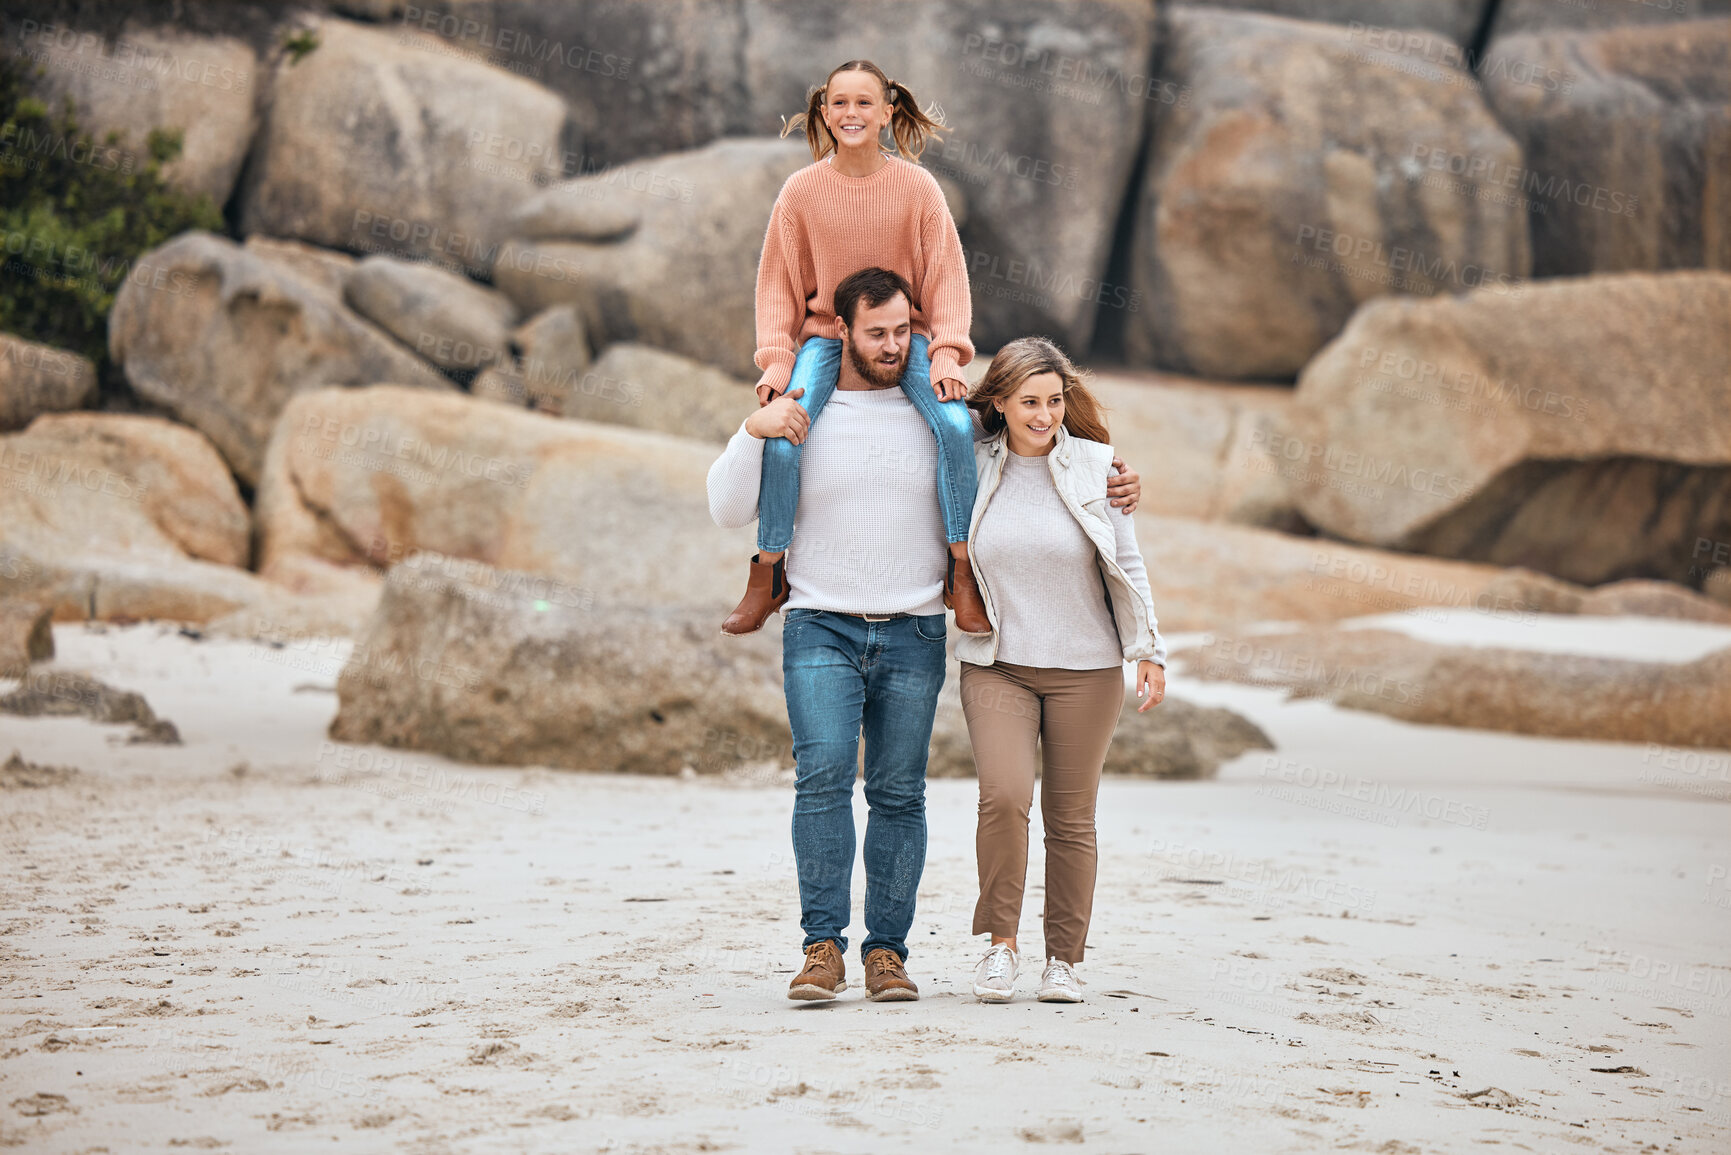 Buy stock photo Family, beach and travel with child, mom and dad walking together for adventure, vacation and bonding time in nature. Man and woman parents with girl by sea for happiness, fitness and outdoor fun